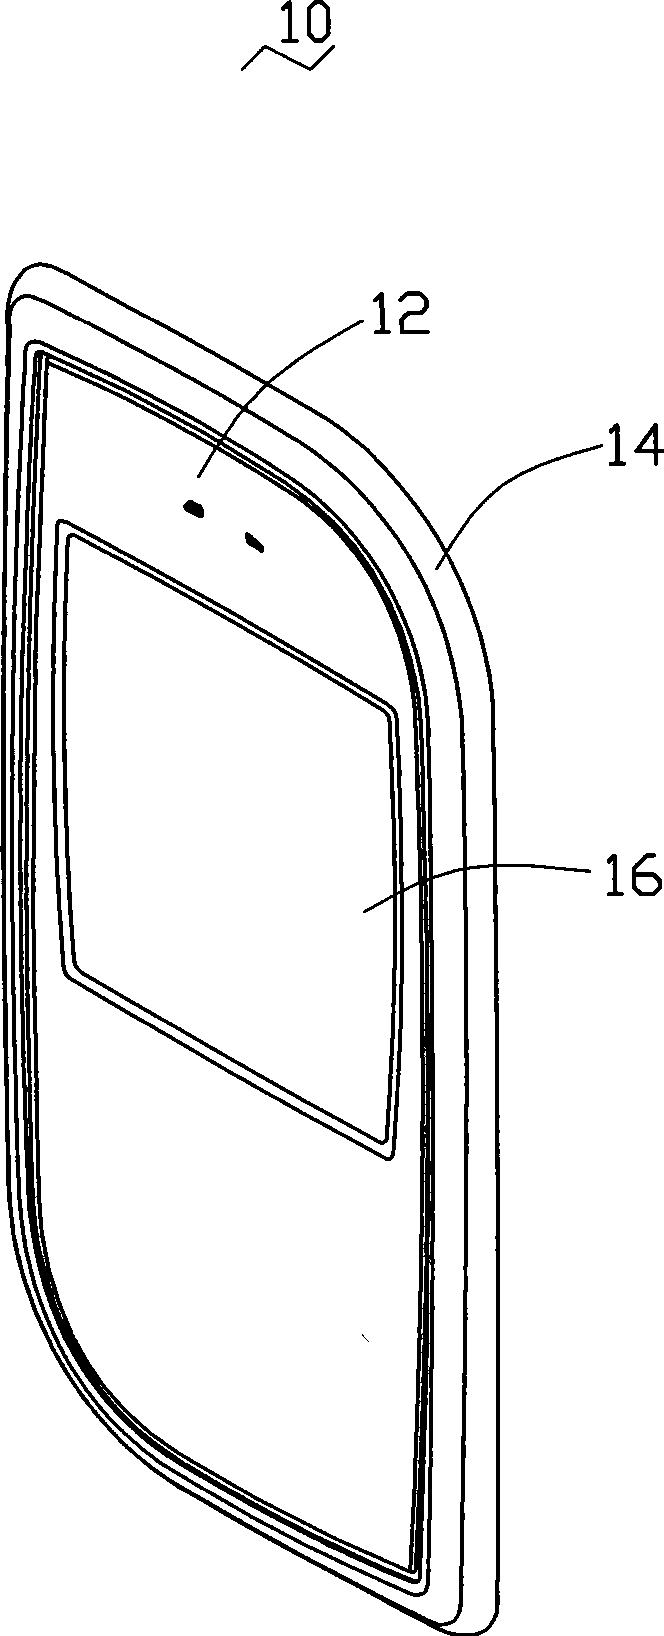 Casing, method and mold for fabricating the same